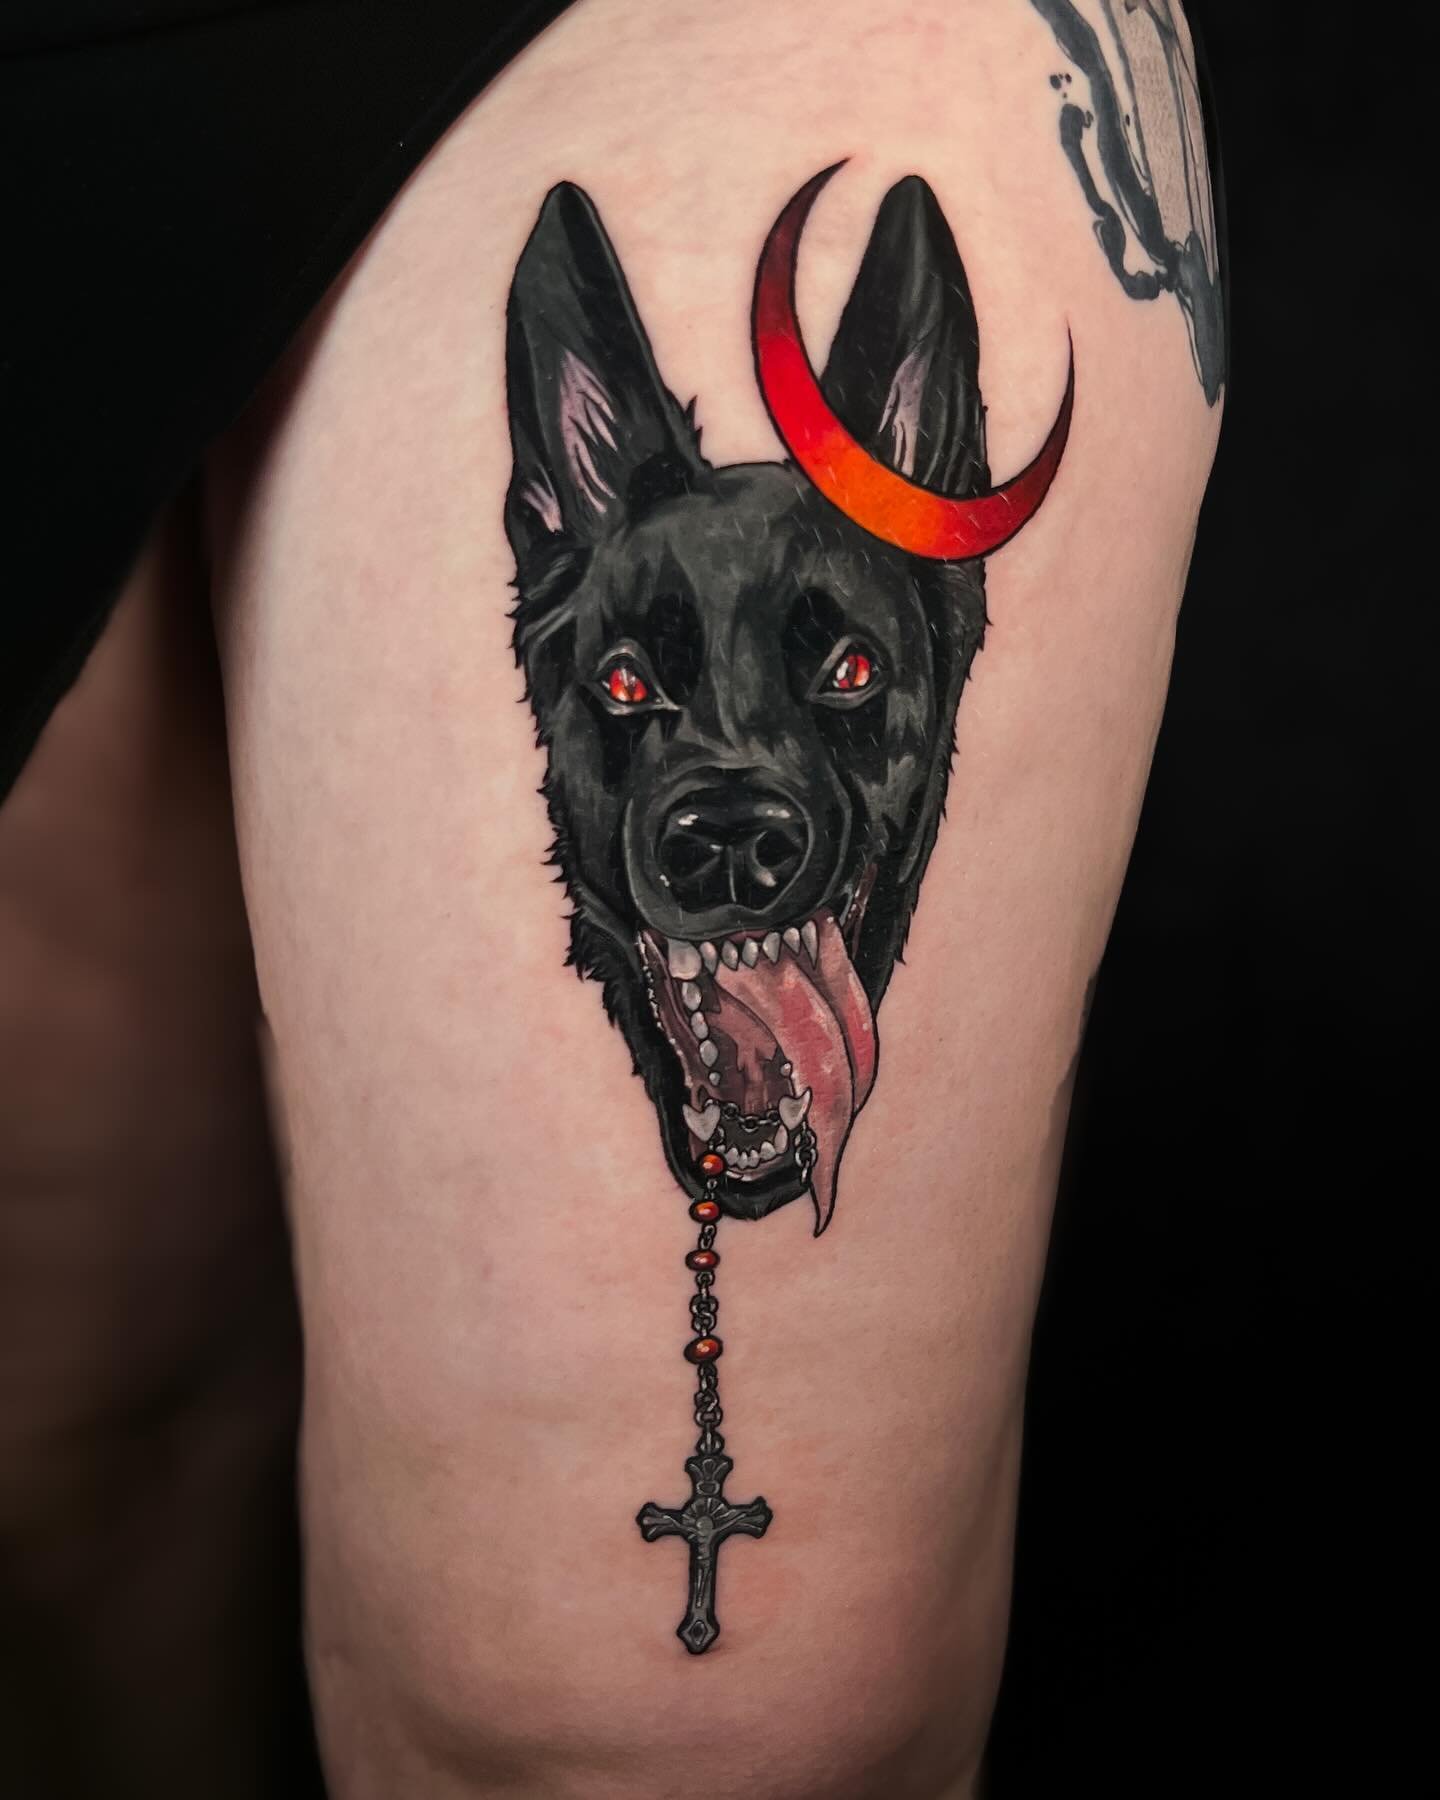 ꧁༒☬𝓱𝓮𝓵𝓵𝓱𝓸𝓾𝓷𝓭☬༒꧂
From my flash! Thank you Lita for giving this one a home! 
.
.
.
.
#hellhound #hellhoundtattoos #demondog #demondogs #demontattoo #demontattoos #femaletattooartist #neotraditional #neotrad #neotraditionaltattoo #oregontattooa